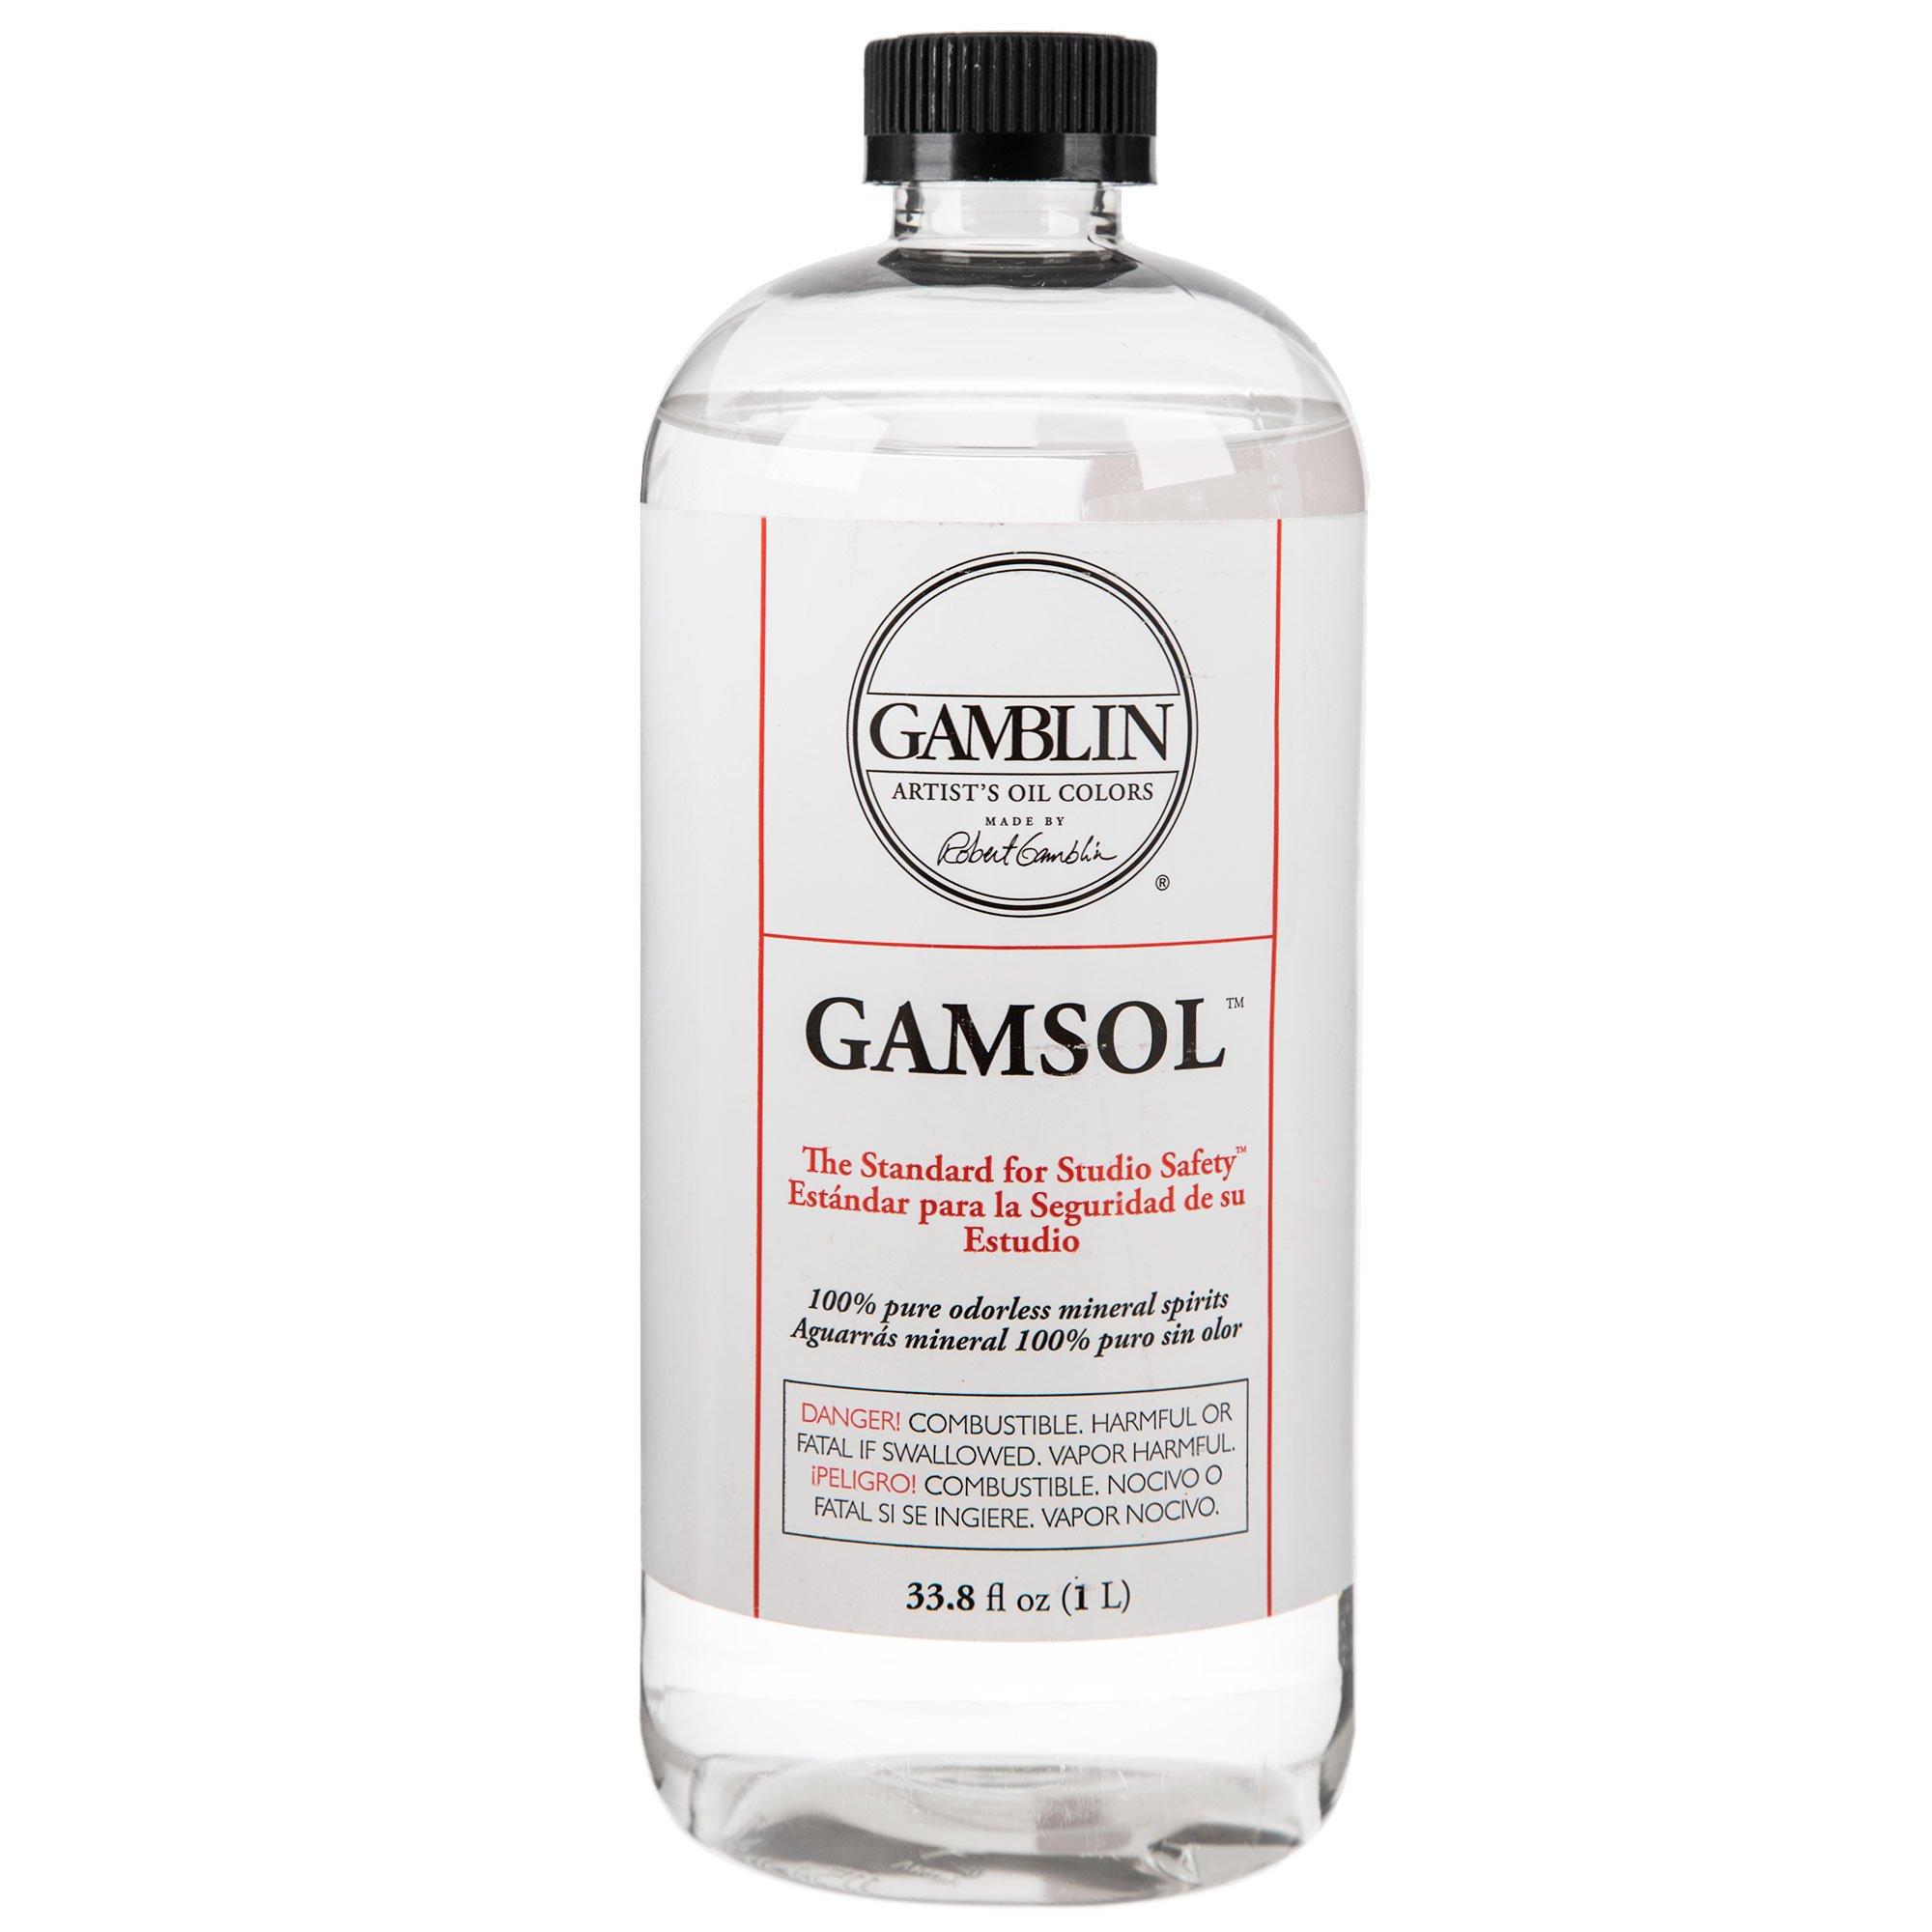 Replying to @lenestrue Gamsol is ordorless mineral spirits that i